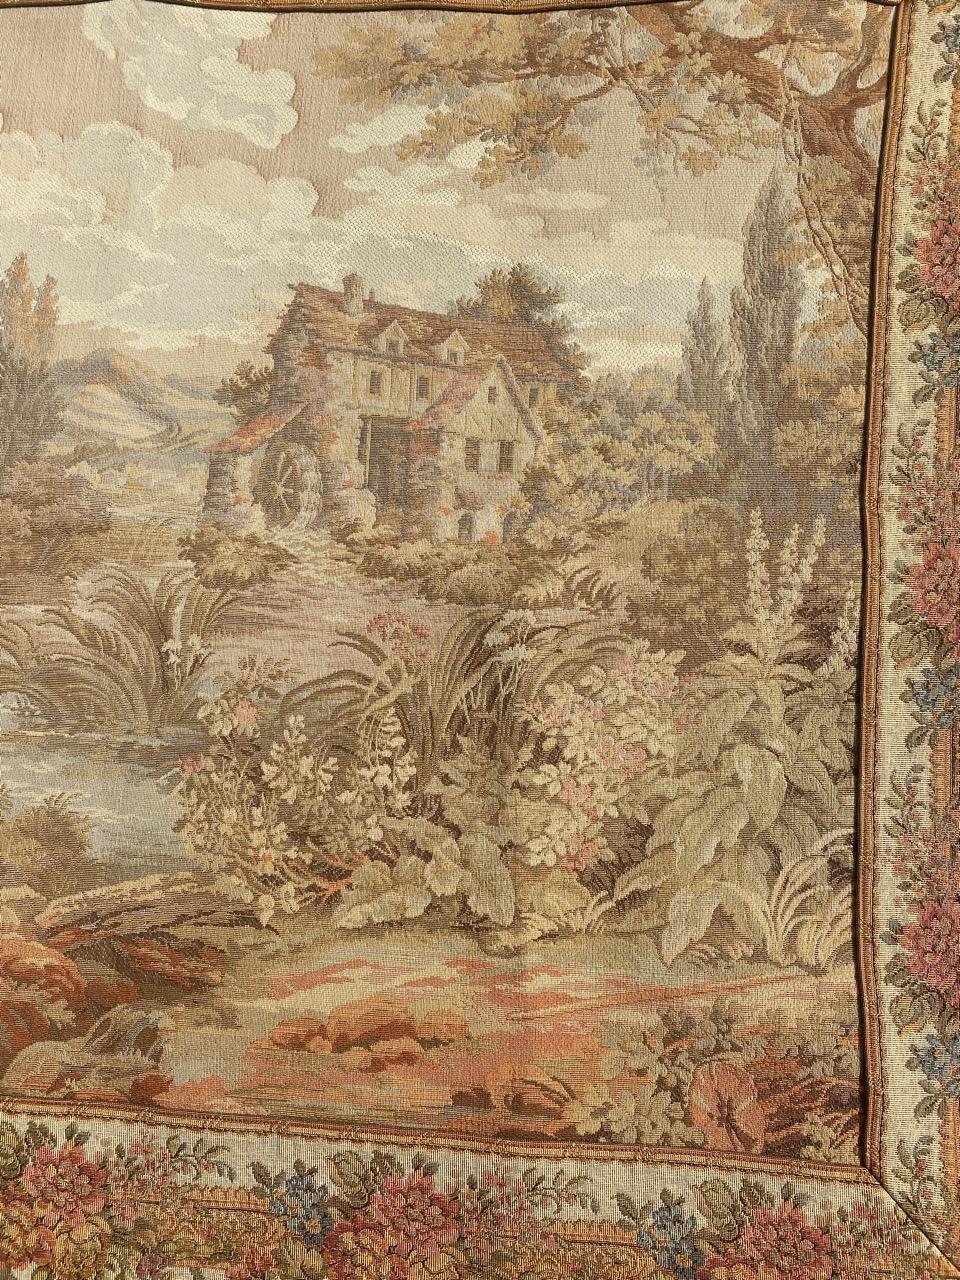 Nice french Aubusson style tapestry with beautiful design of nature and town, and nice colors, woven by mechanical Jaquar manufacturing with wool and cotton.

✨✨✨
